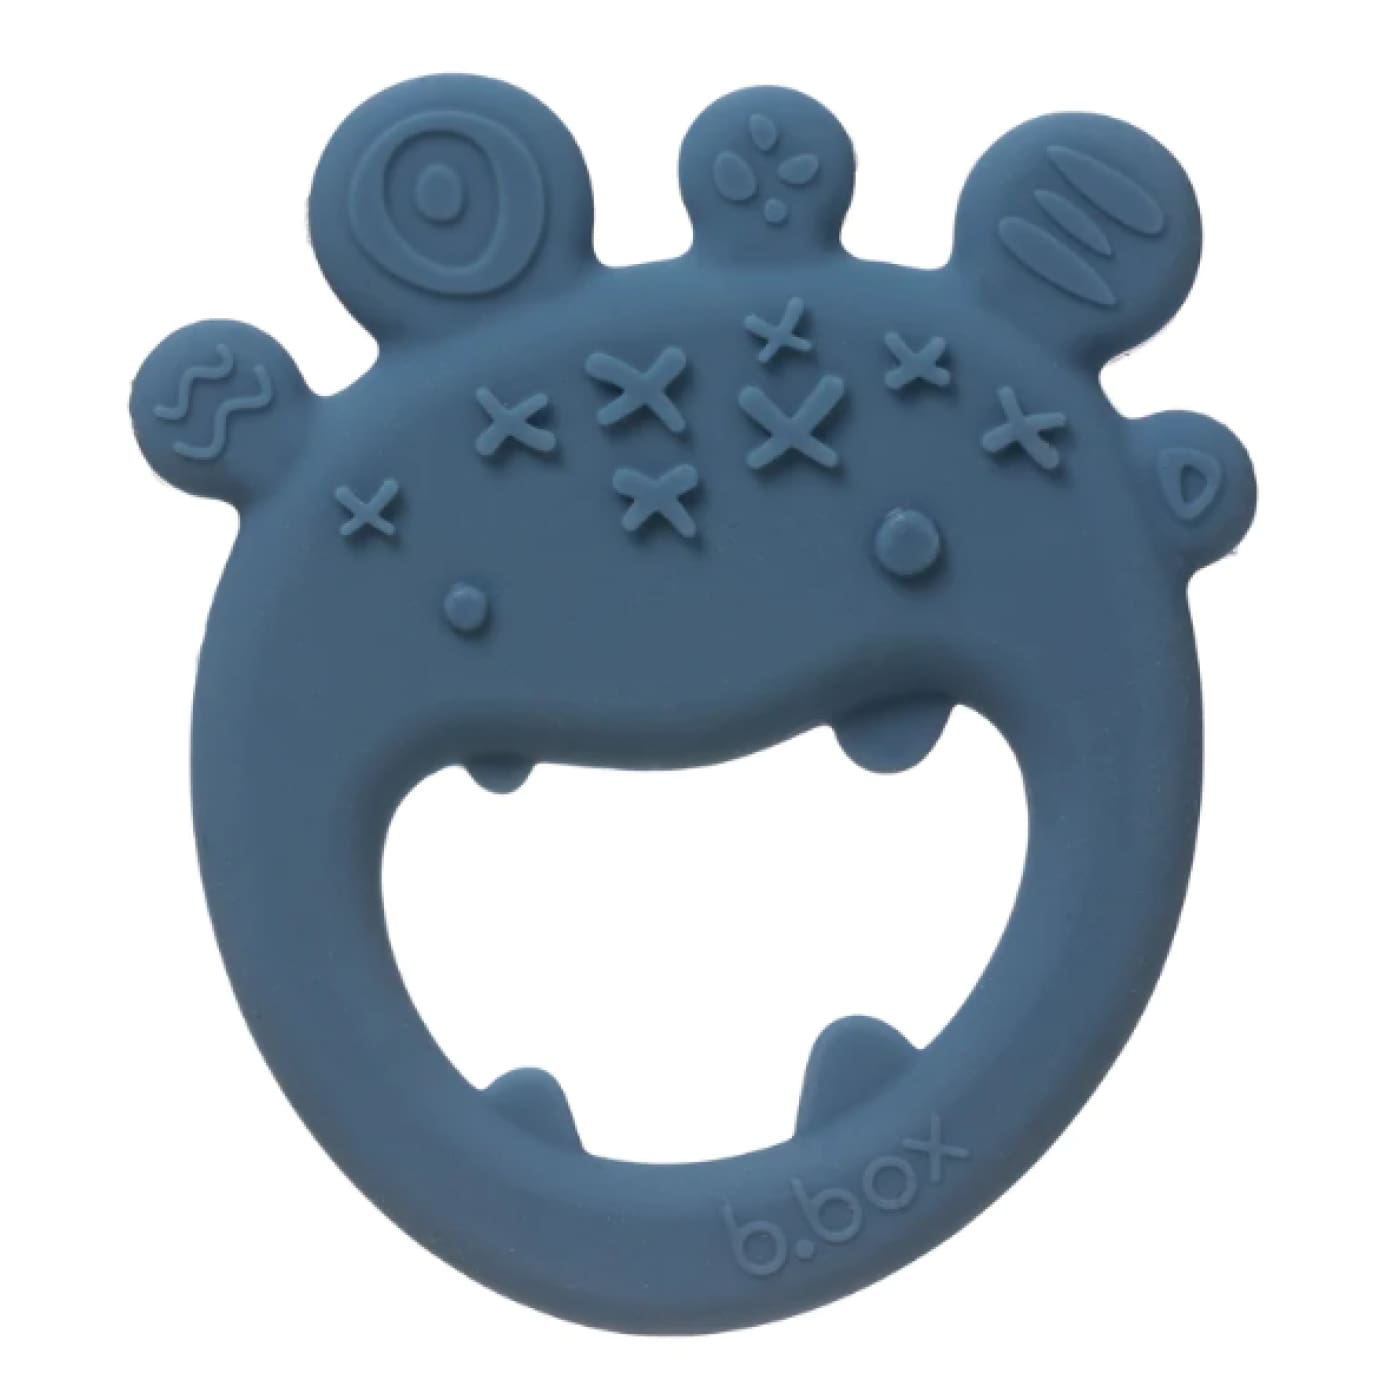 b.box Trio Teether - Lullaby Blue Monsters - Lullaby Blue Monsters - NURSING & FEEDING - TEETHERS/TEETHING JEWELLERY